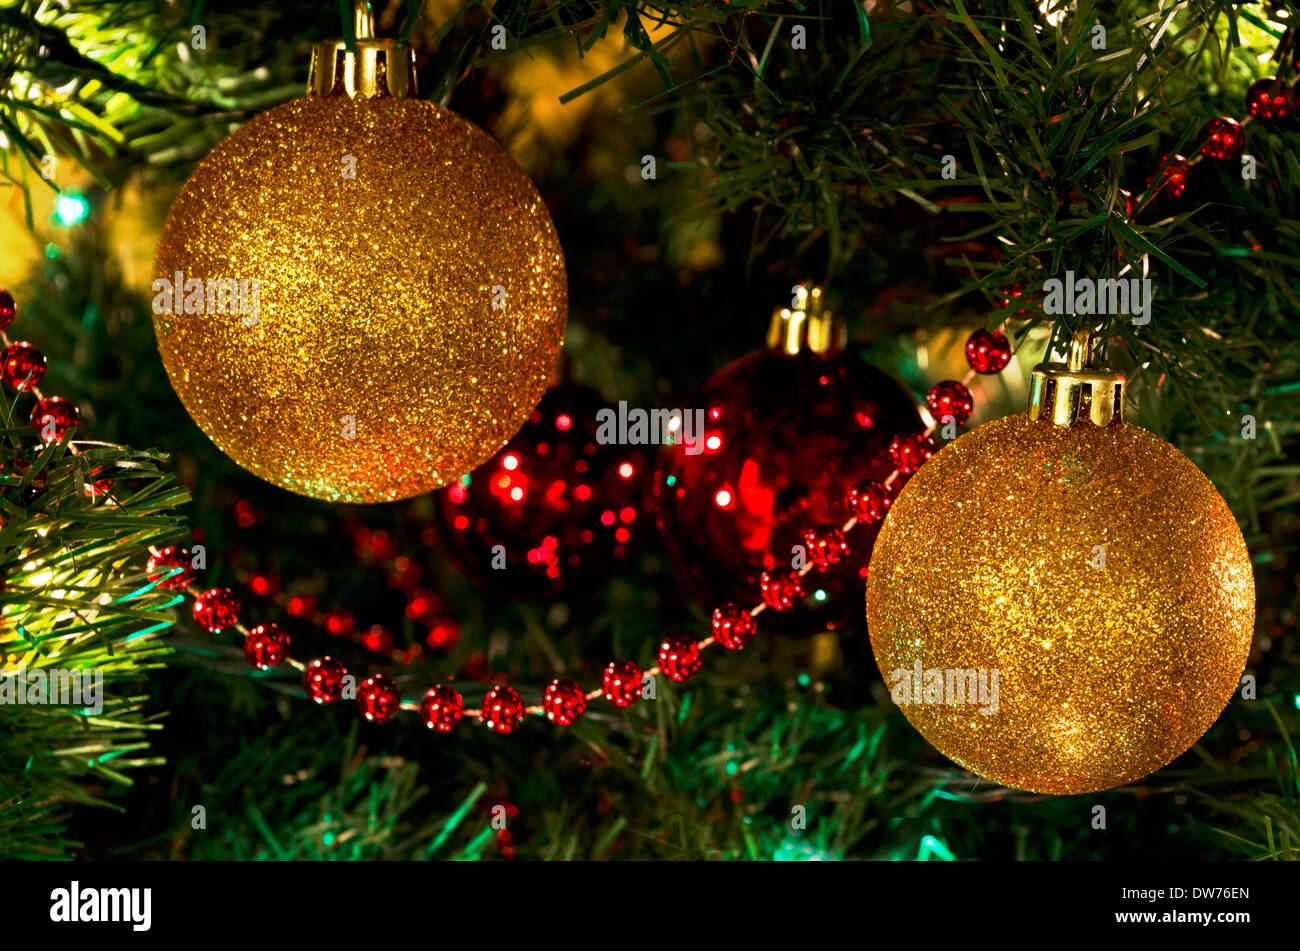 Two glittering gold ball Christmas ornaments on the tree.  With red trim and red balls, festive holiday decorations. Stock Photo